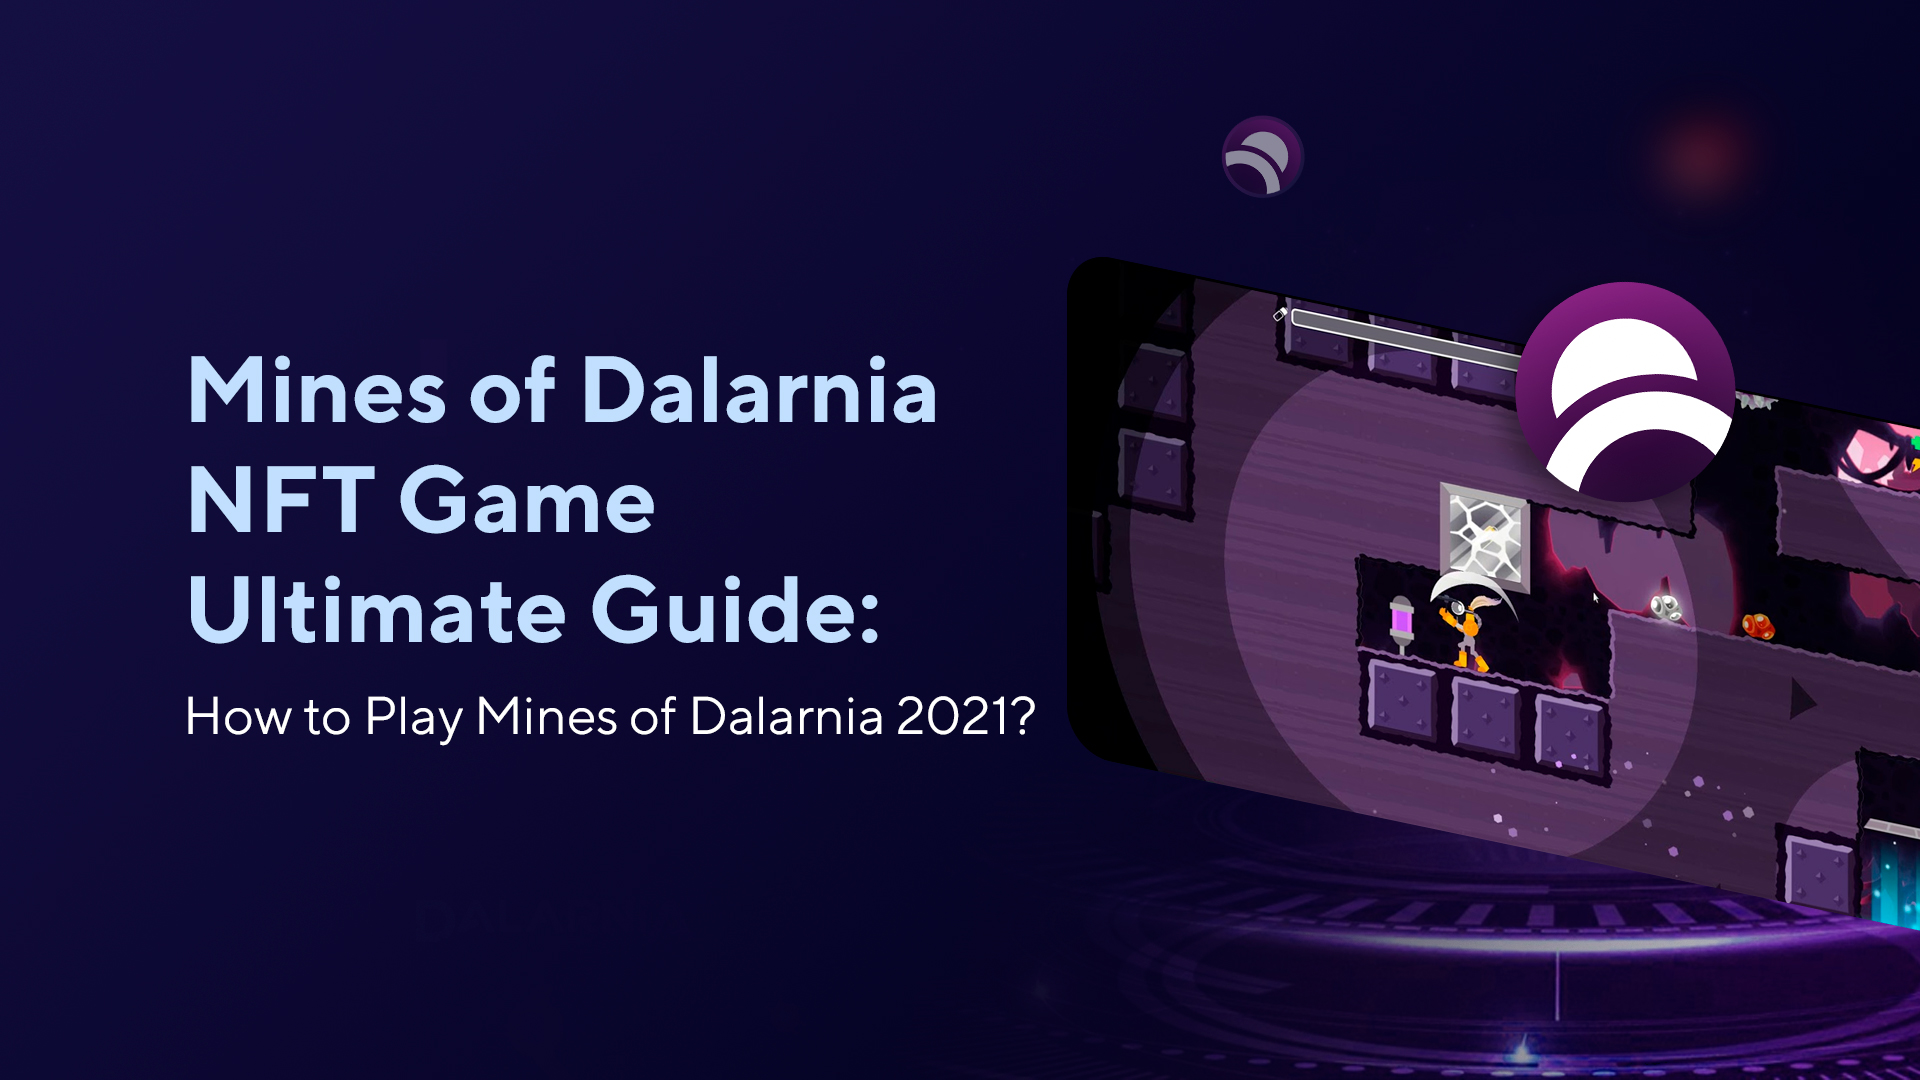 Mines of Dalarnia NFT Game Ultimate Guide: How to Play Mines of Dalarnia 2022?